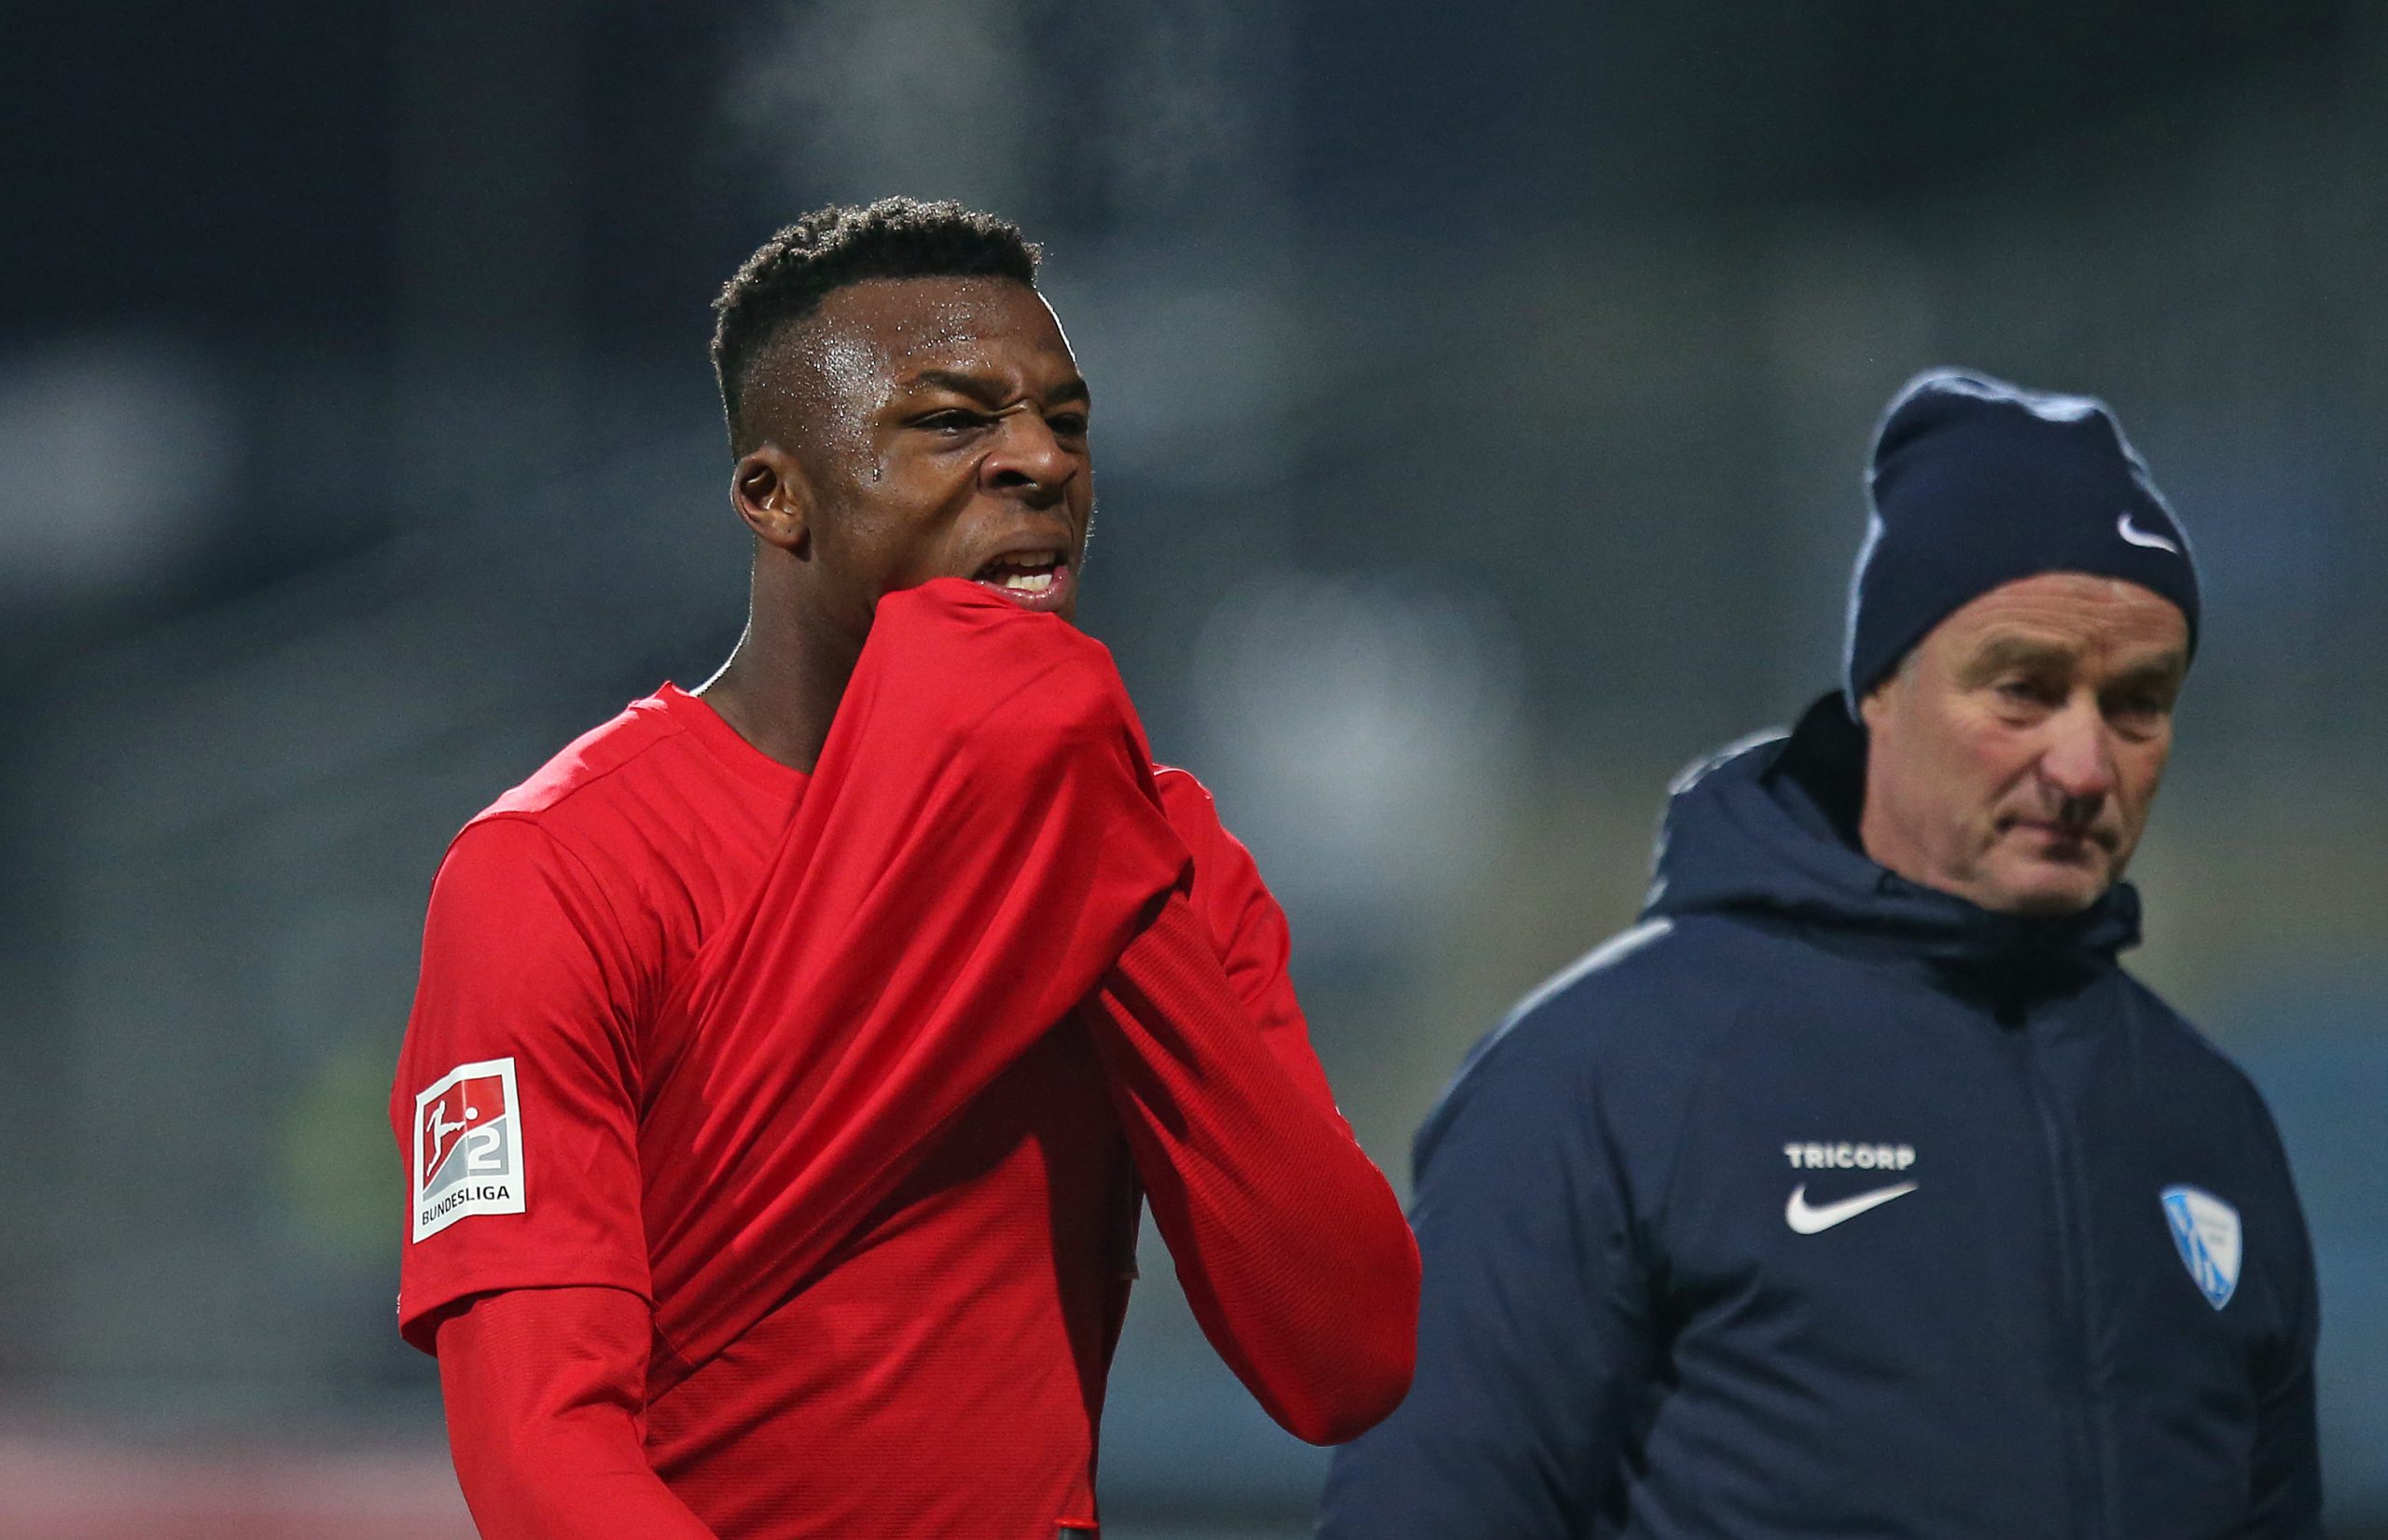 KIEL, GERMANY - DECEMBER 04: Armel Bella-Kotchap of VfL Bochum reacts during the Second Bundesliga match between Holstein Kiel and VfL Bochum 1848 at Holstein-Stadion on December 04, 2020 in Kiel, Germany. (Photo by Cathrin Mueller/Getty Images)
The 4th Official uses images provided by the following image agency:
Getty Images (https://www.gettyimages.de/)
Imago Images (https://www.imago-images.de/)